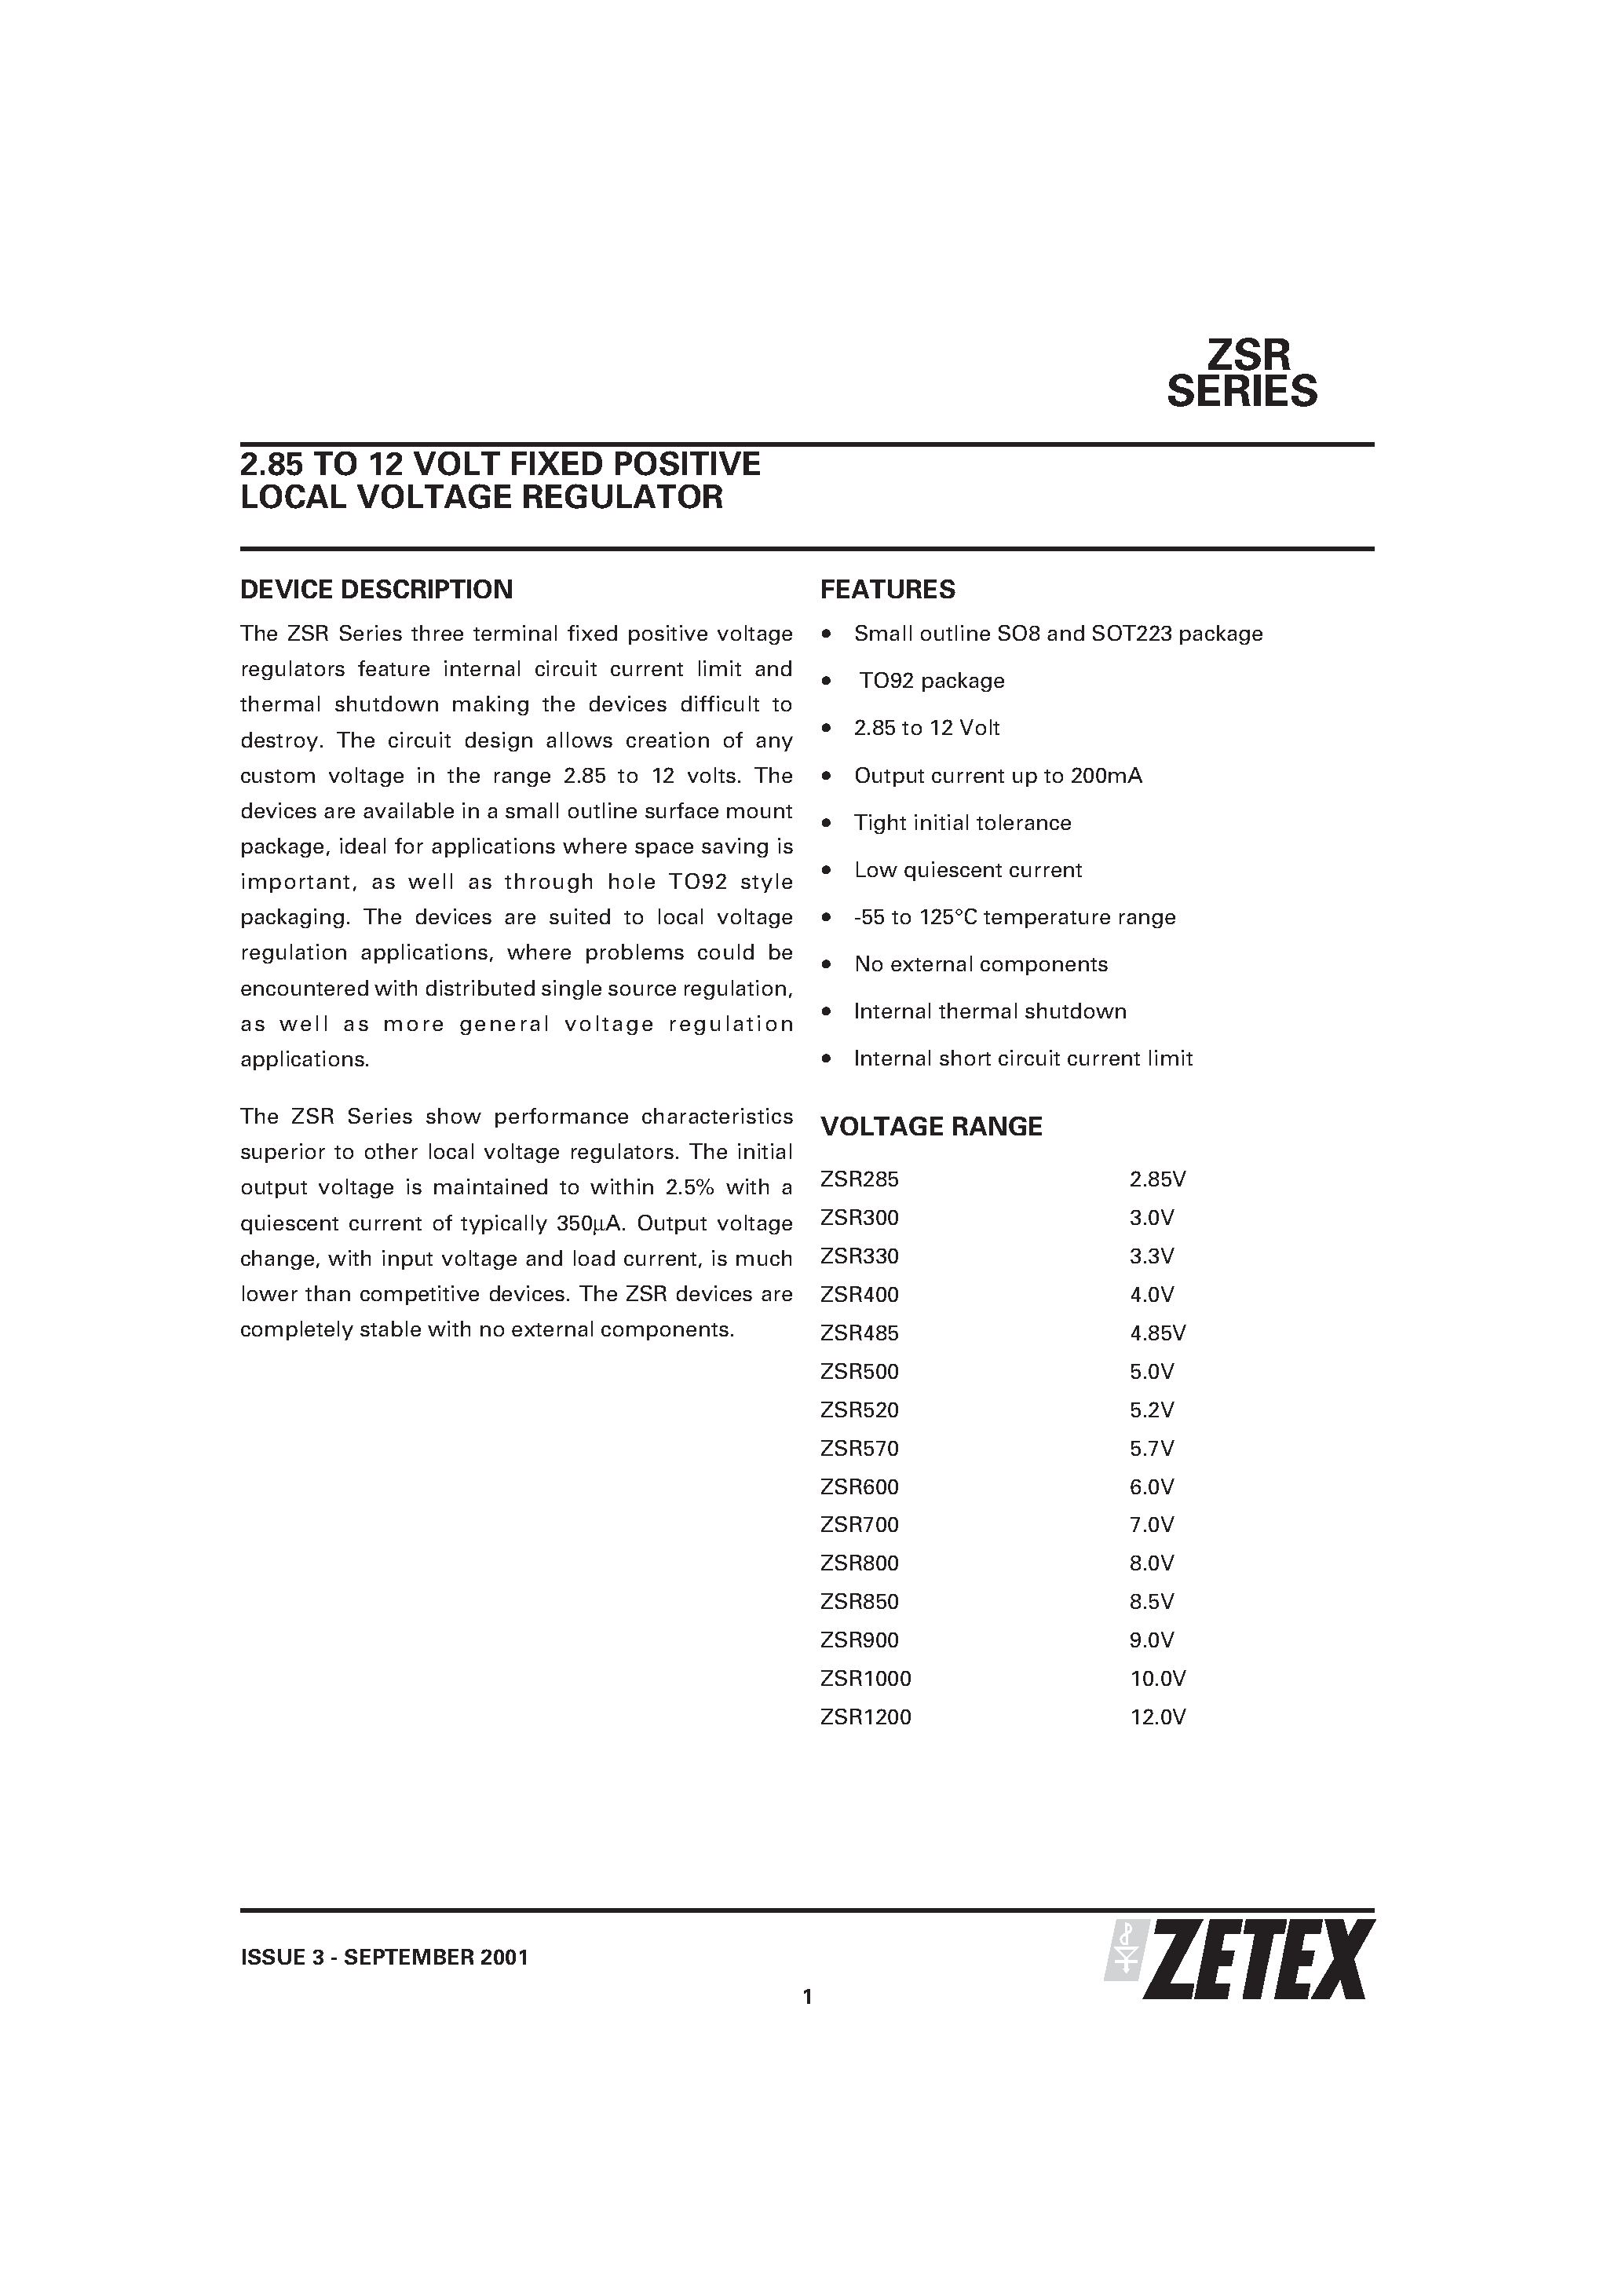 Datasheet ZSR400N8 - 2.85 TO 12 VOLT FIXED POSITIVE LOCAL VOLTAGE REGULATOR page 1